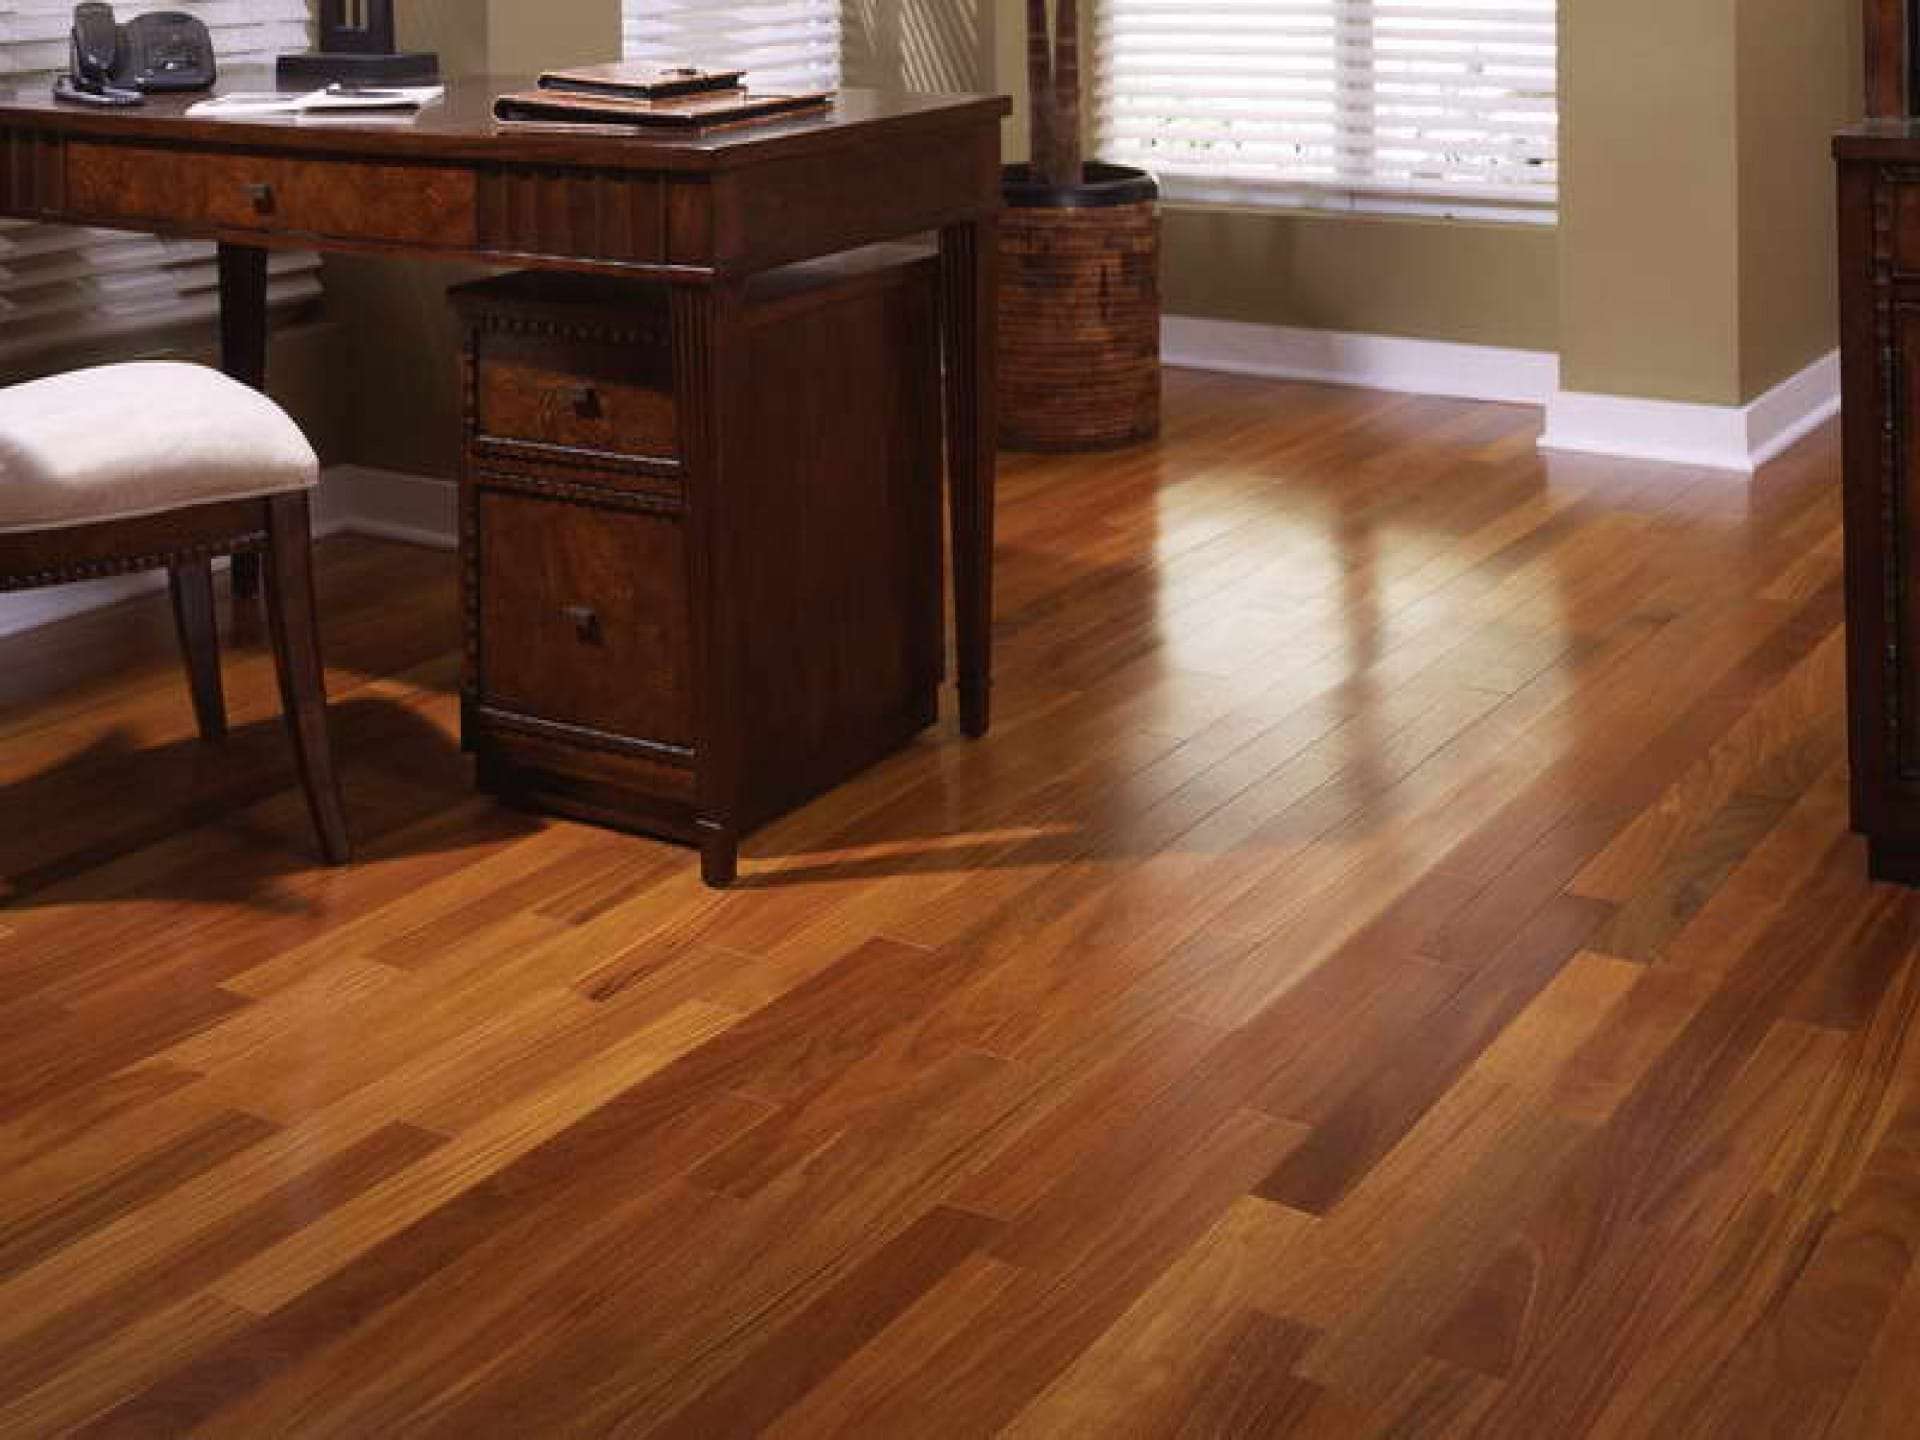 Learning about the design options, benefits, disadvantages, and costs of the different types of wood flooring can help you make the right choice.